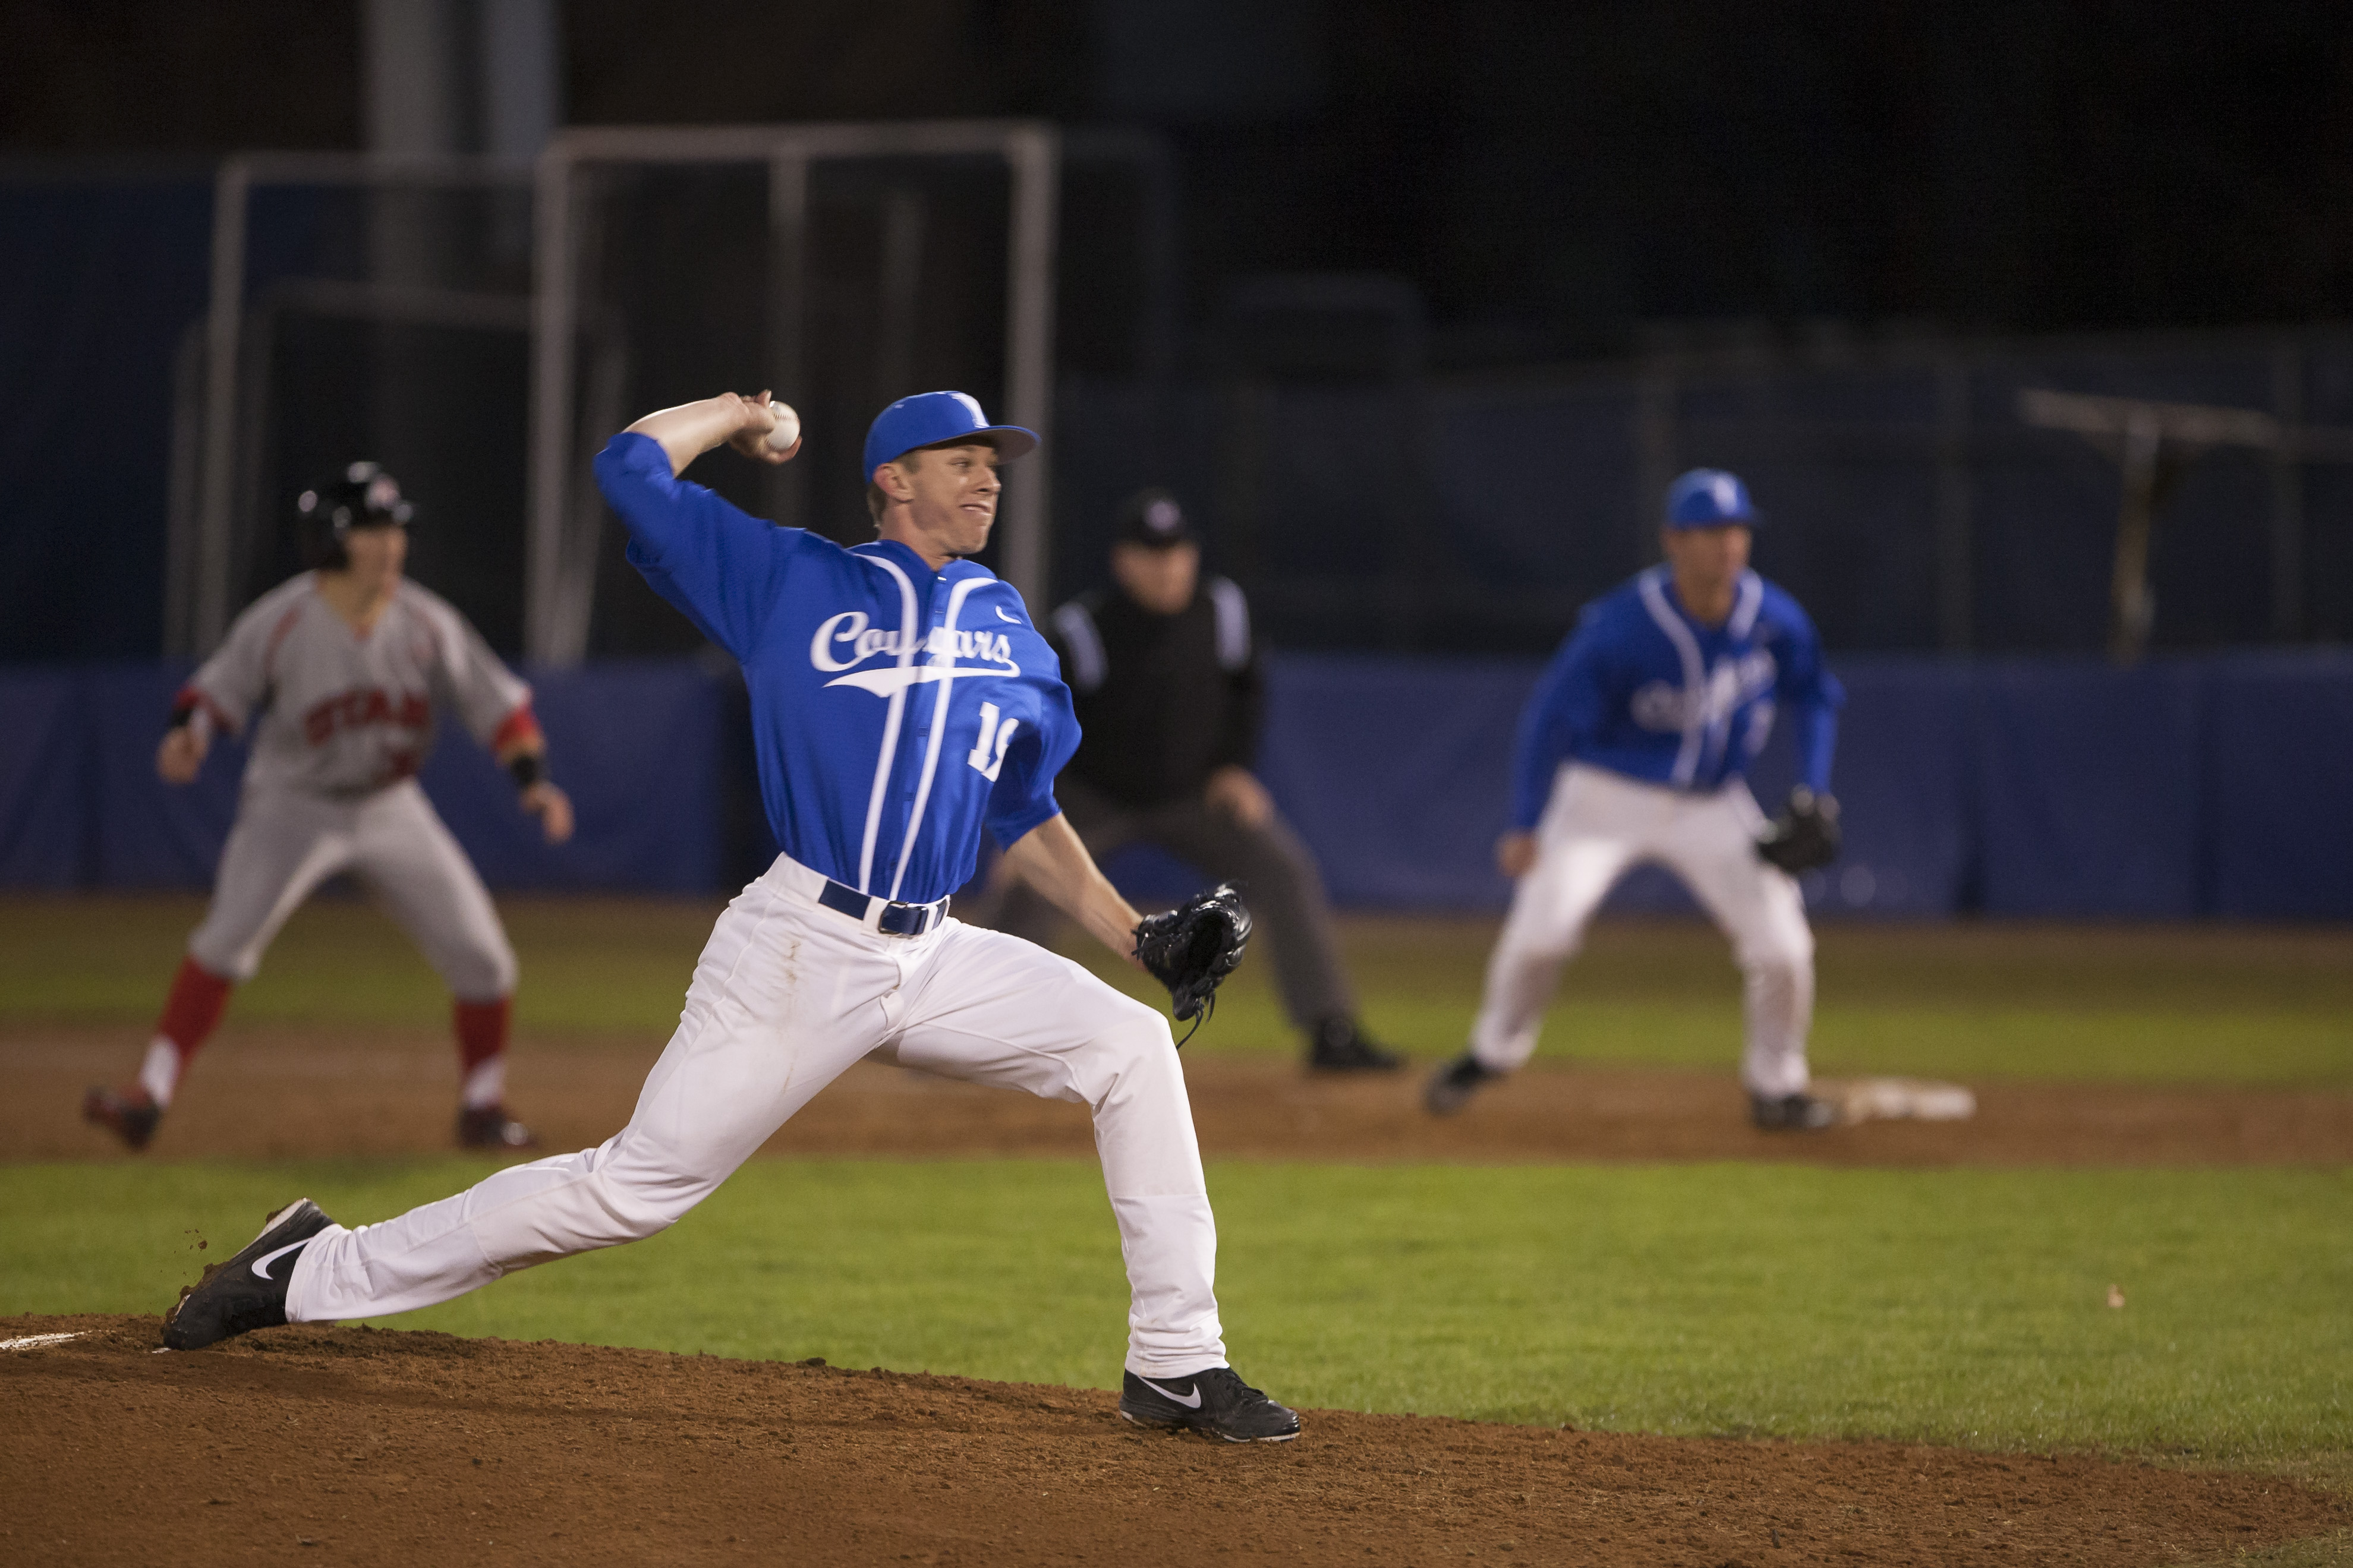 BYU baseball soars past Utah with blowout win - The Daily Universe